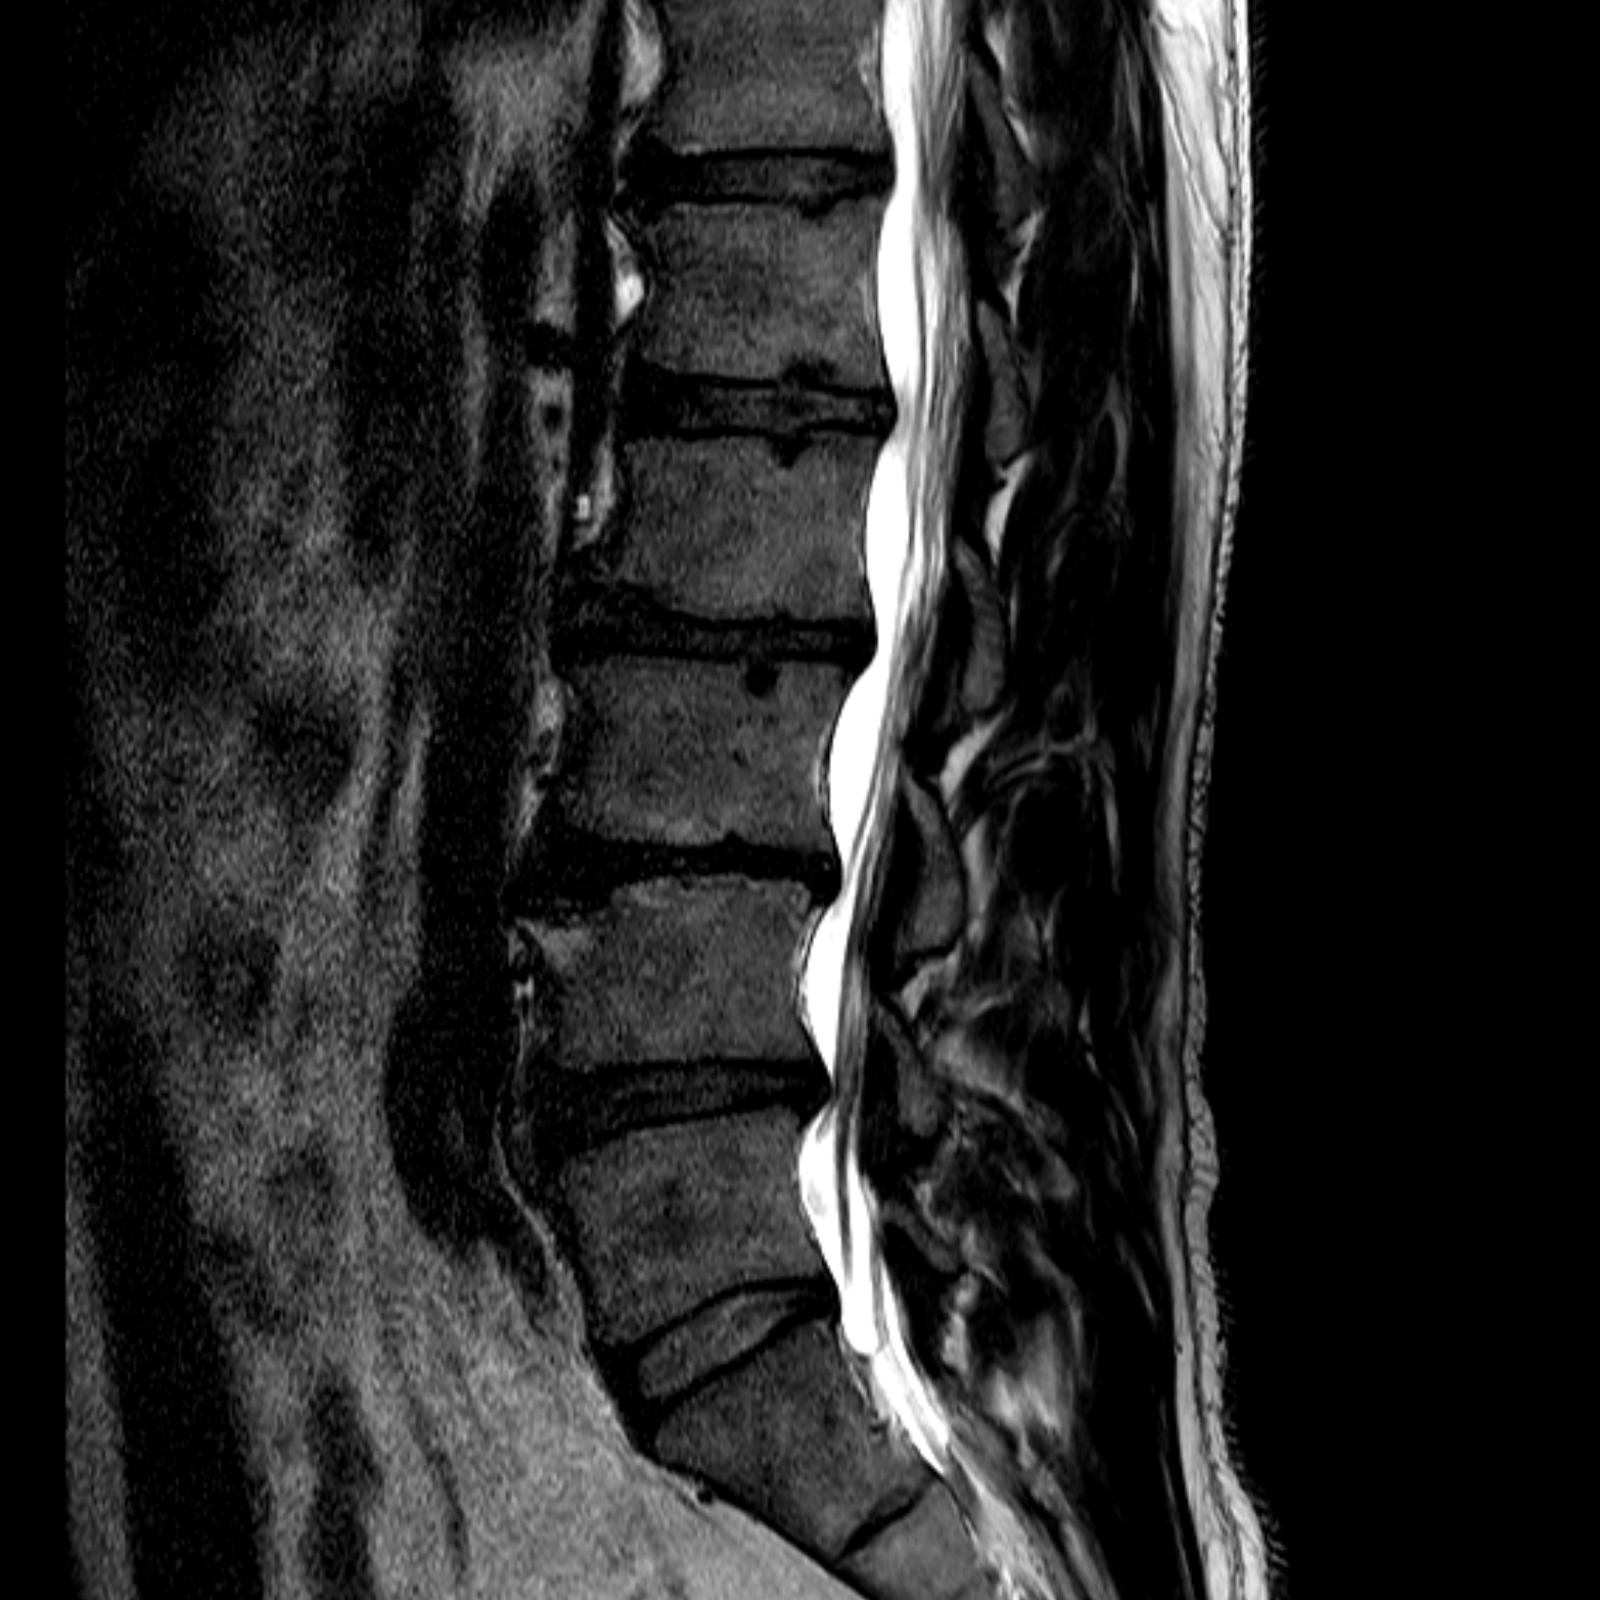 MRI Scan, Spine with Conventional Scanner